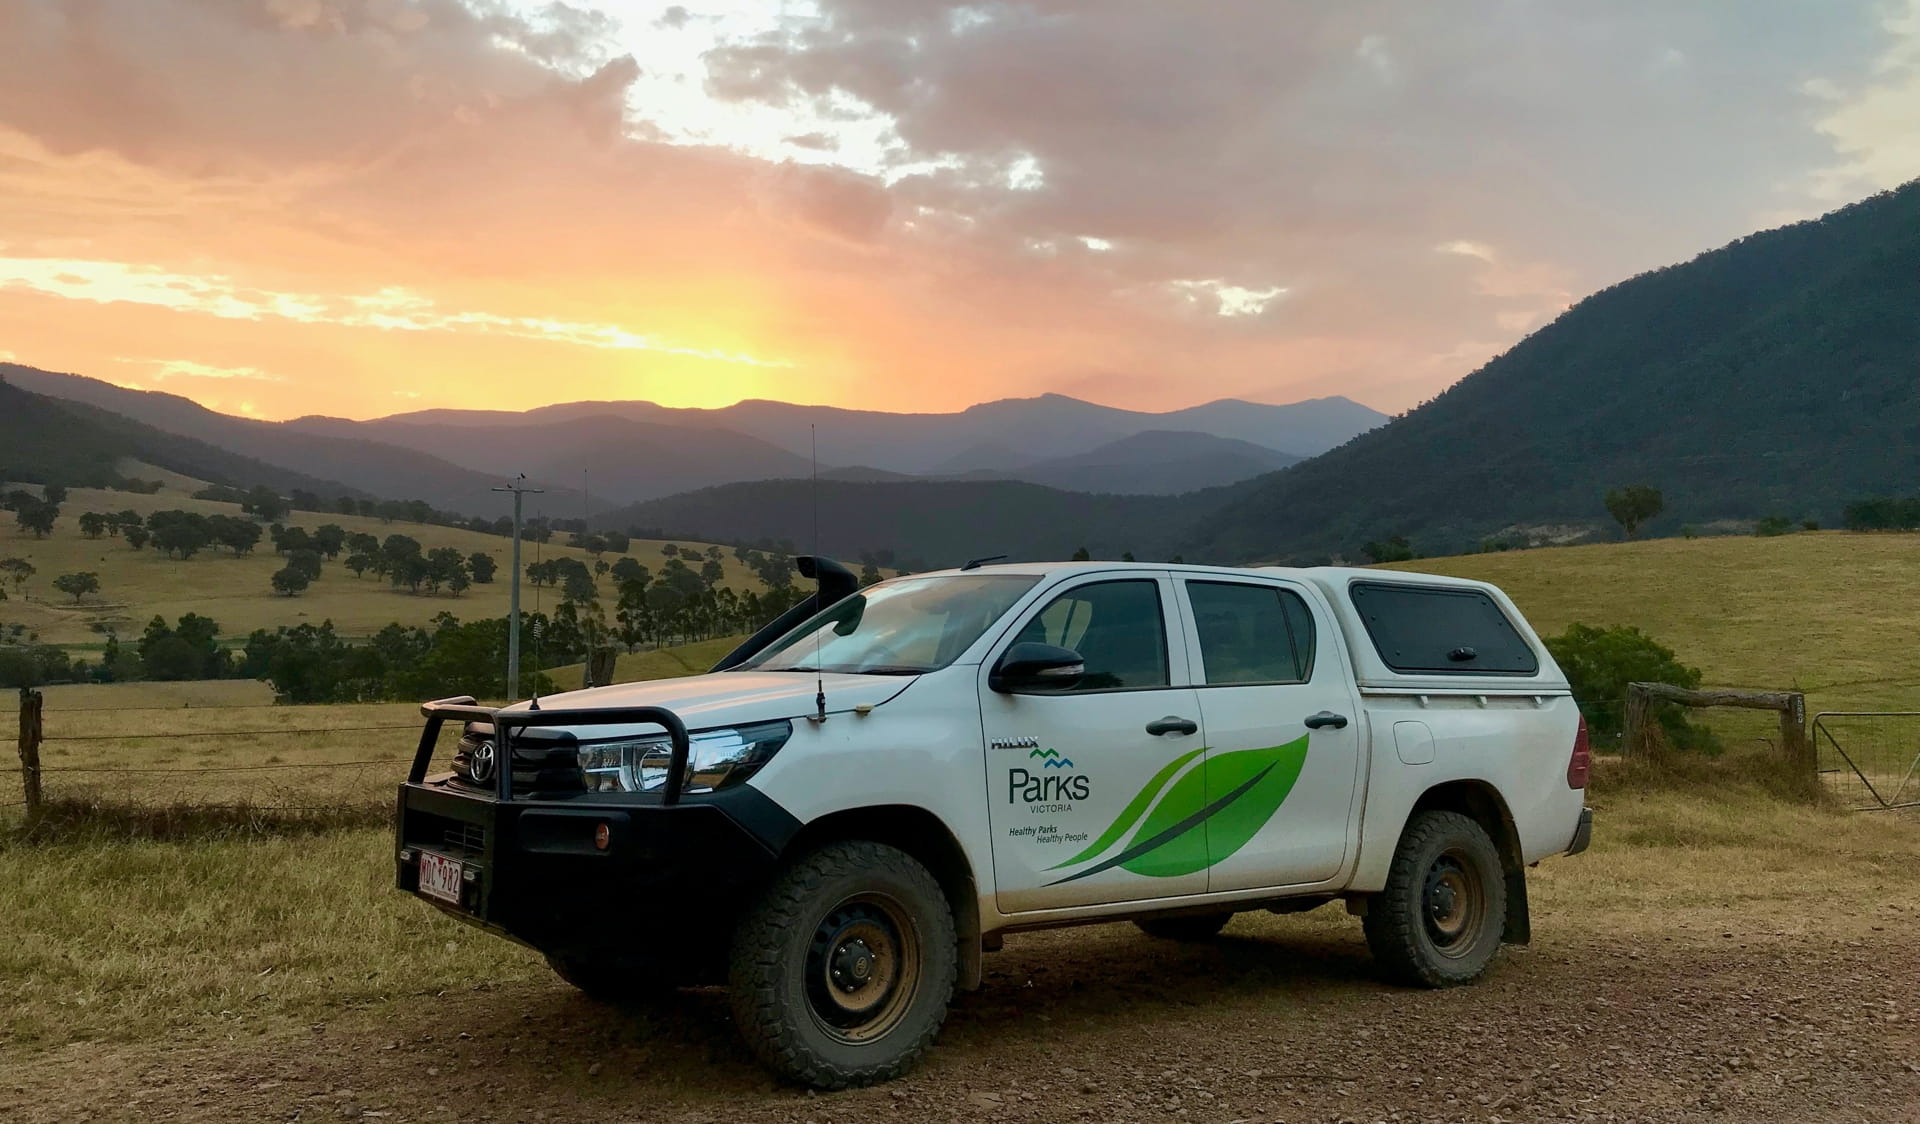 A Parks Victoria 4WD parked in front of a sunset over the mountains in Alpine National Park